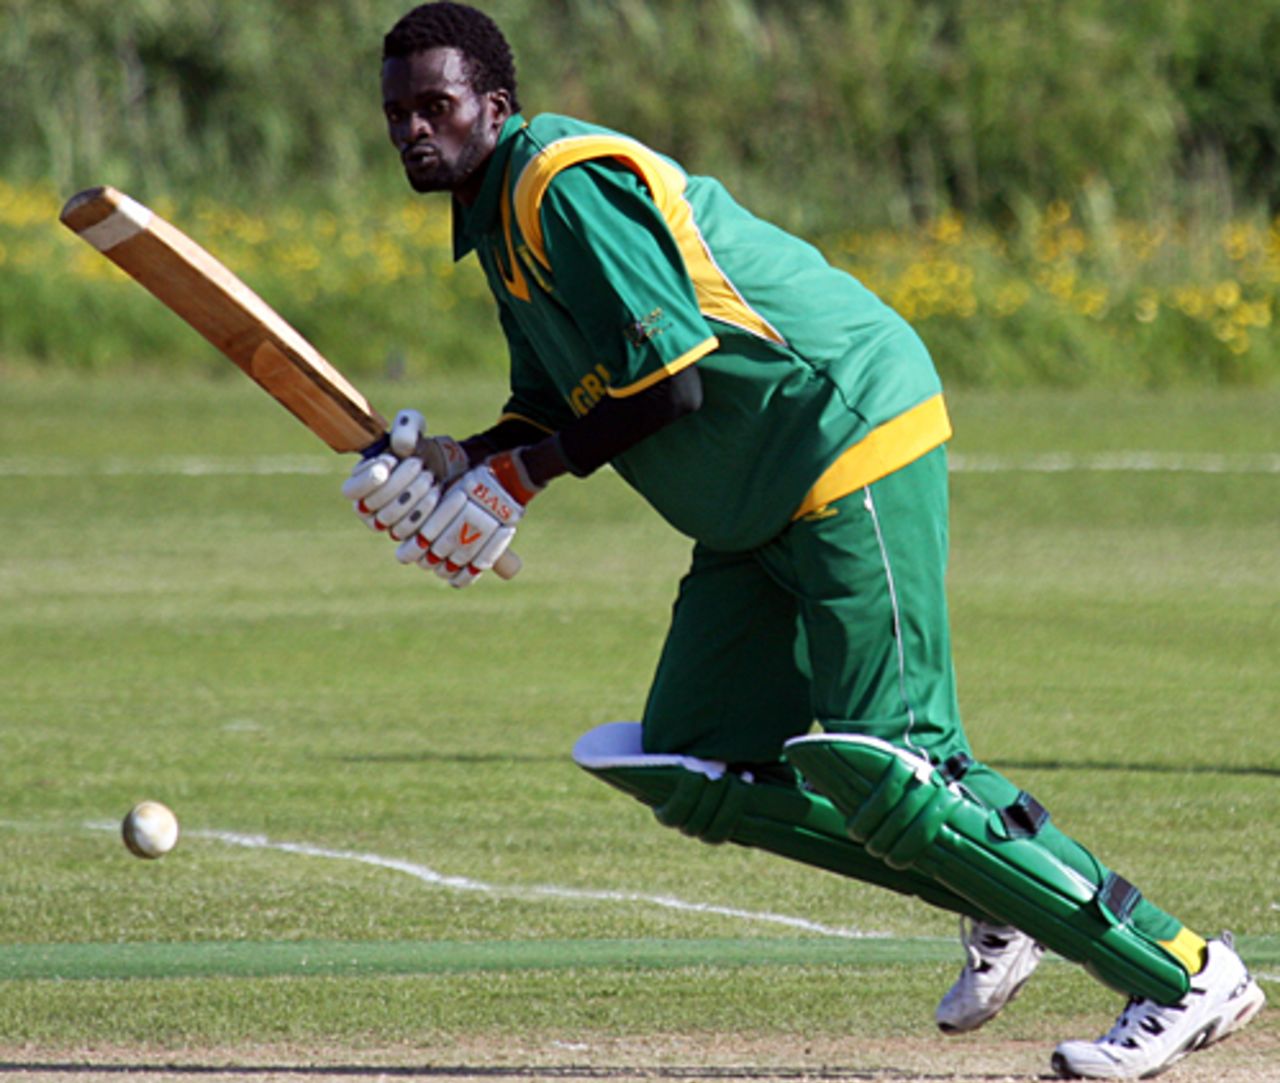 Kunle Adegbola plays it through midwicket, Nigeria v Suriname, ICC World Cricket League Division 7, Port Soif, May 19, 2009